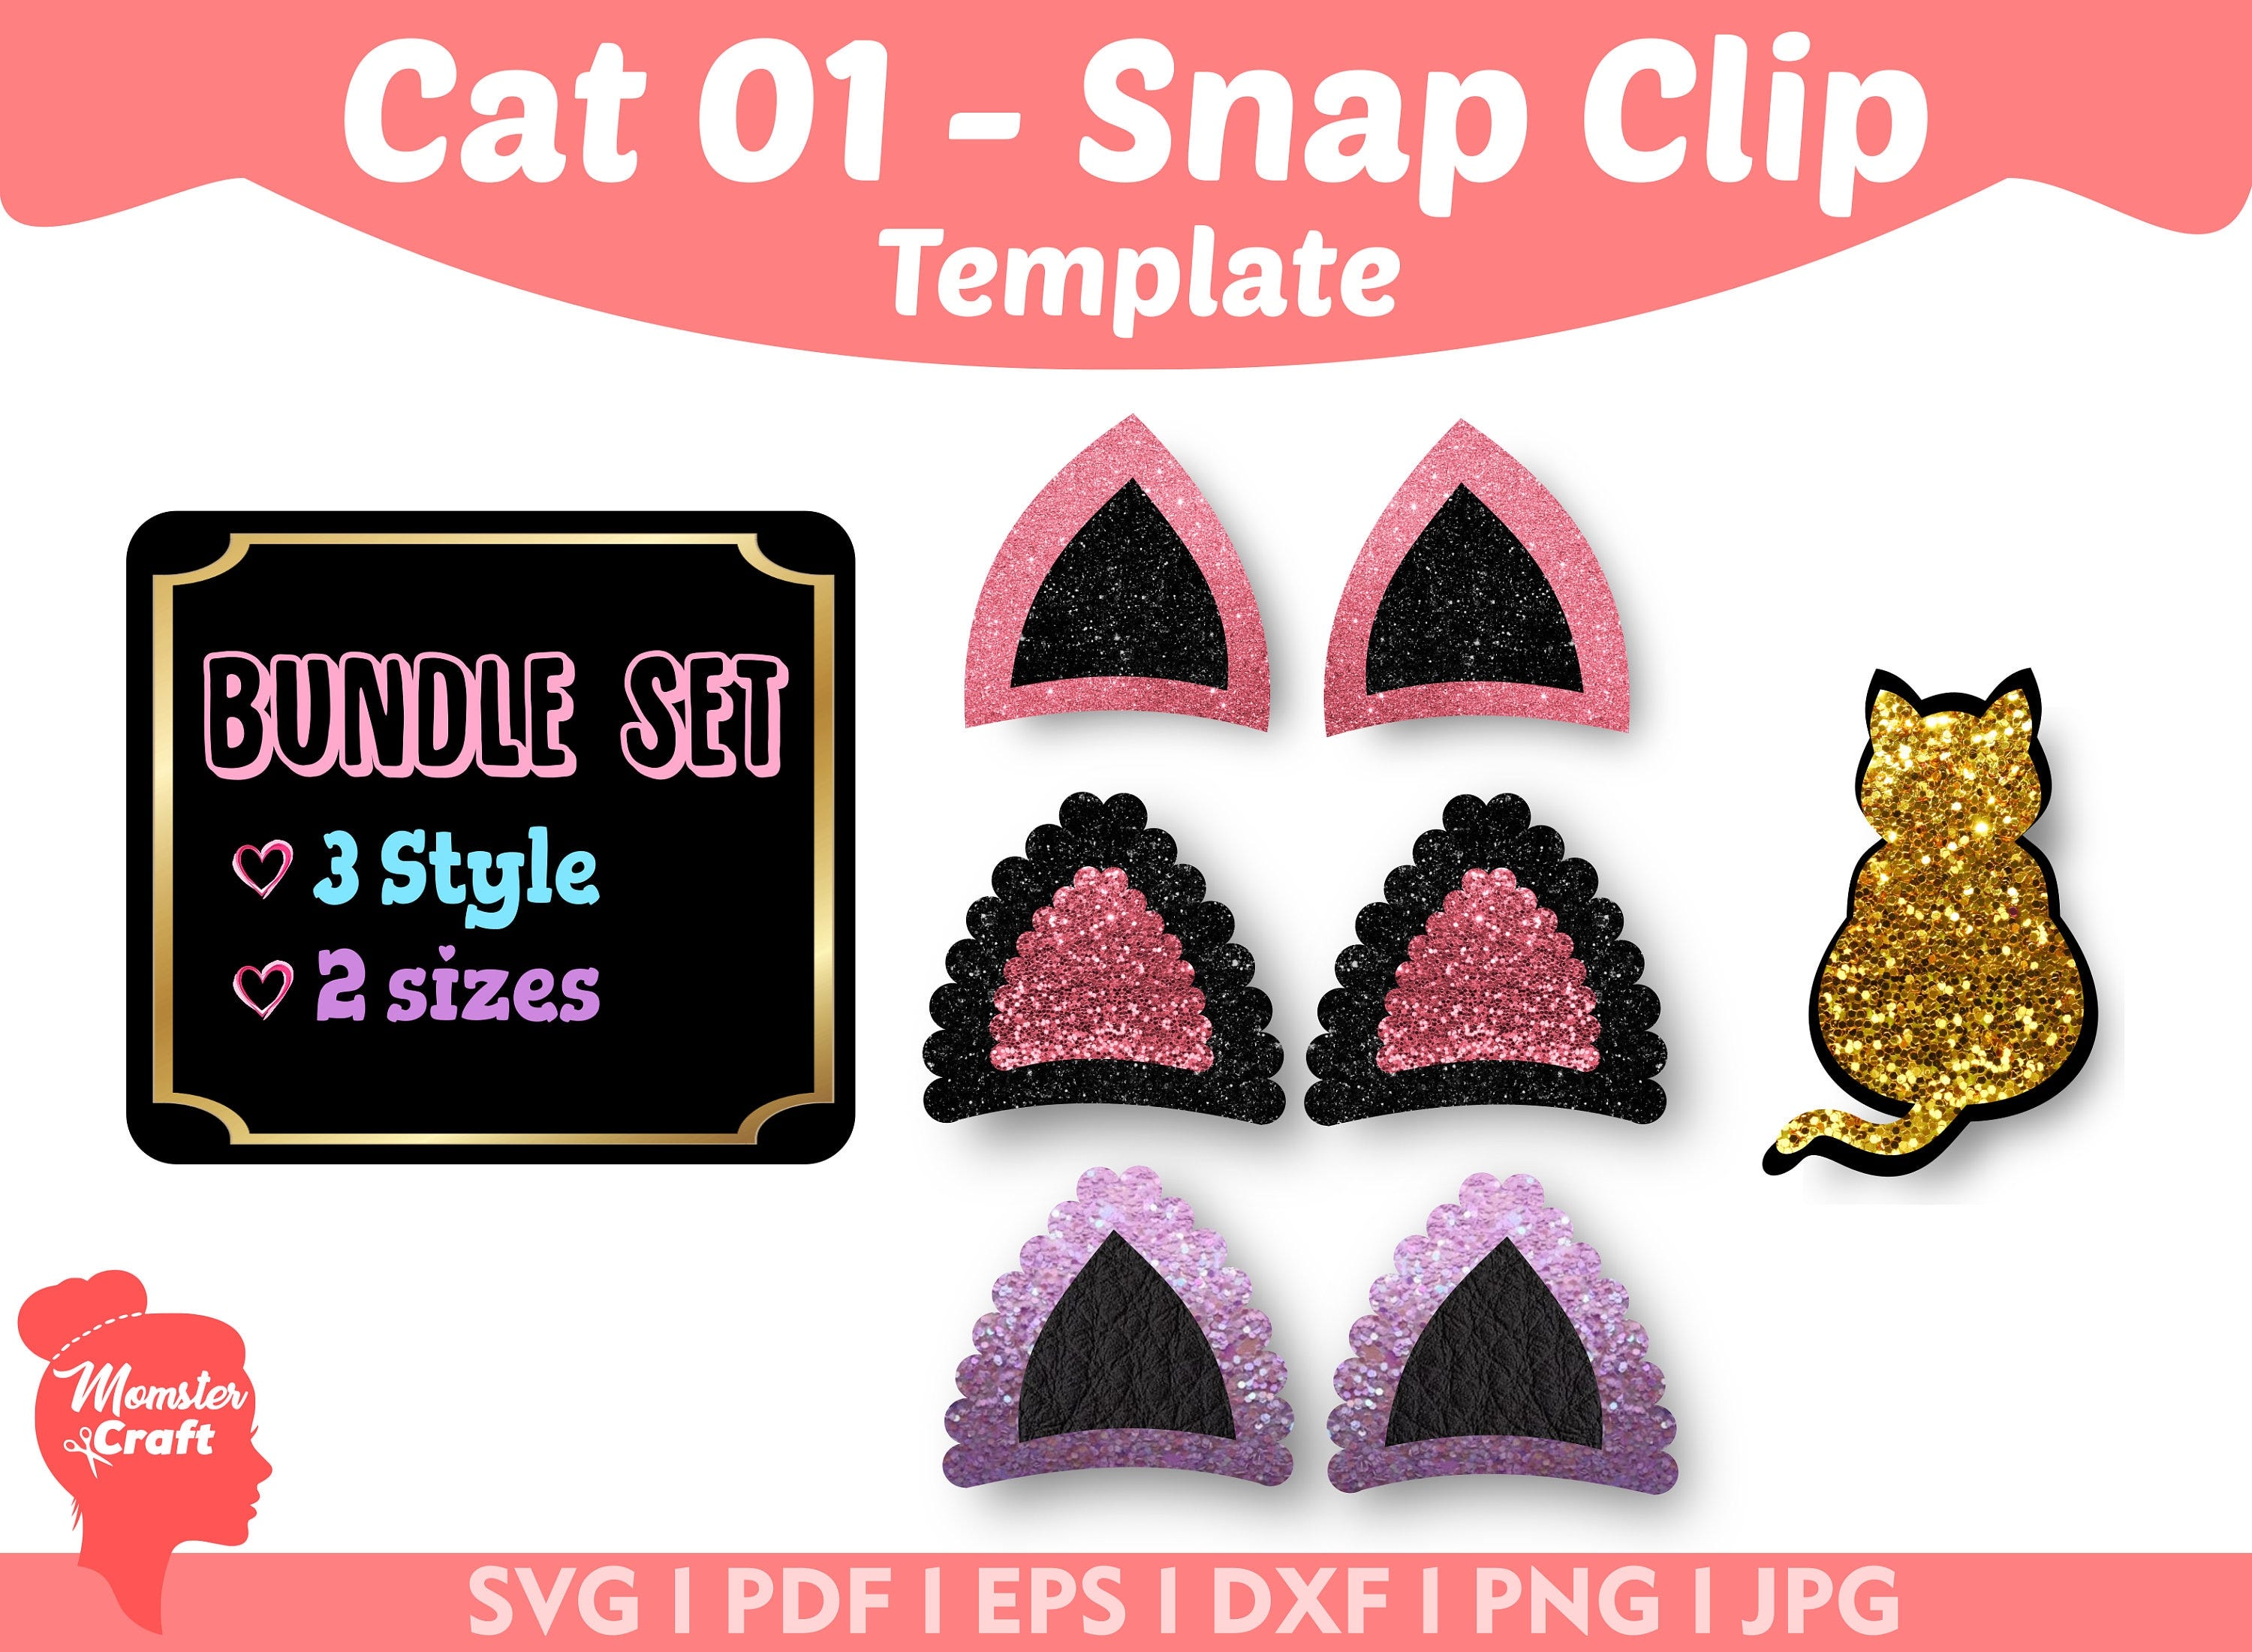 Cat Ears Snap Clip SVG, Snapclip Template, Clippie Cover,  Hair Clip Svg, Bow Template, Bow SVG, cut files for Cricut Silhouette  #Cat ears